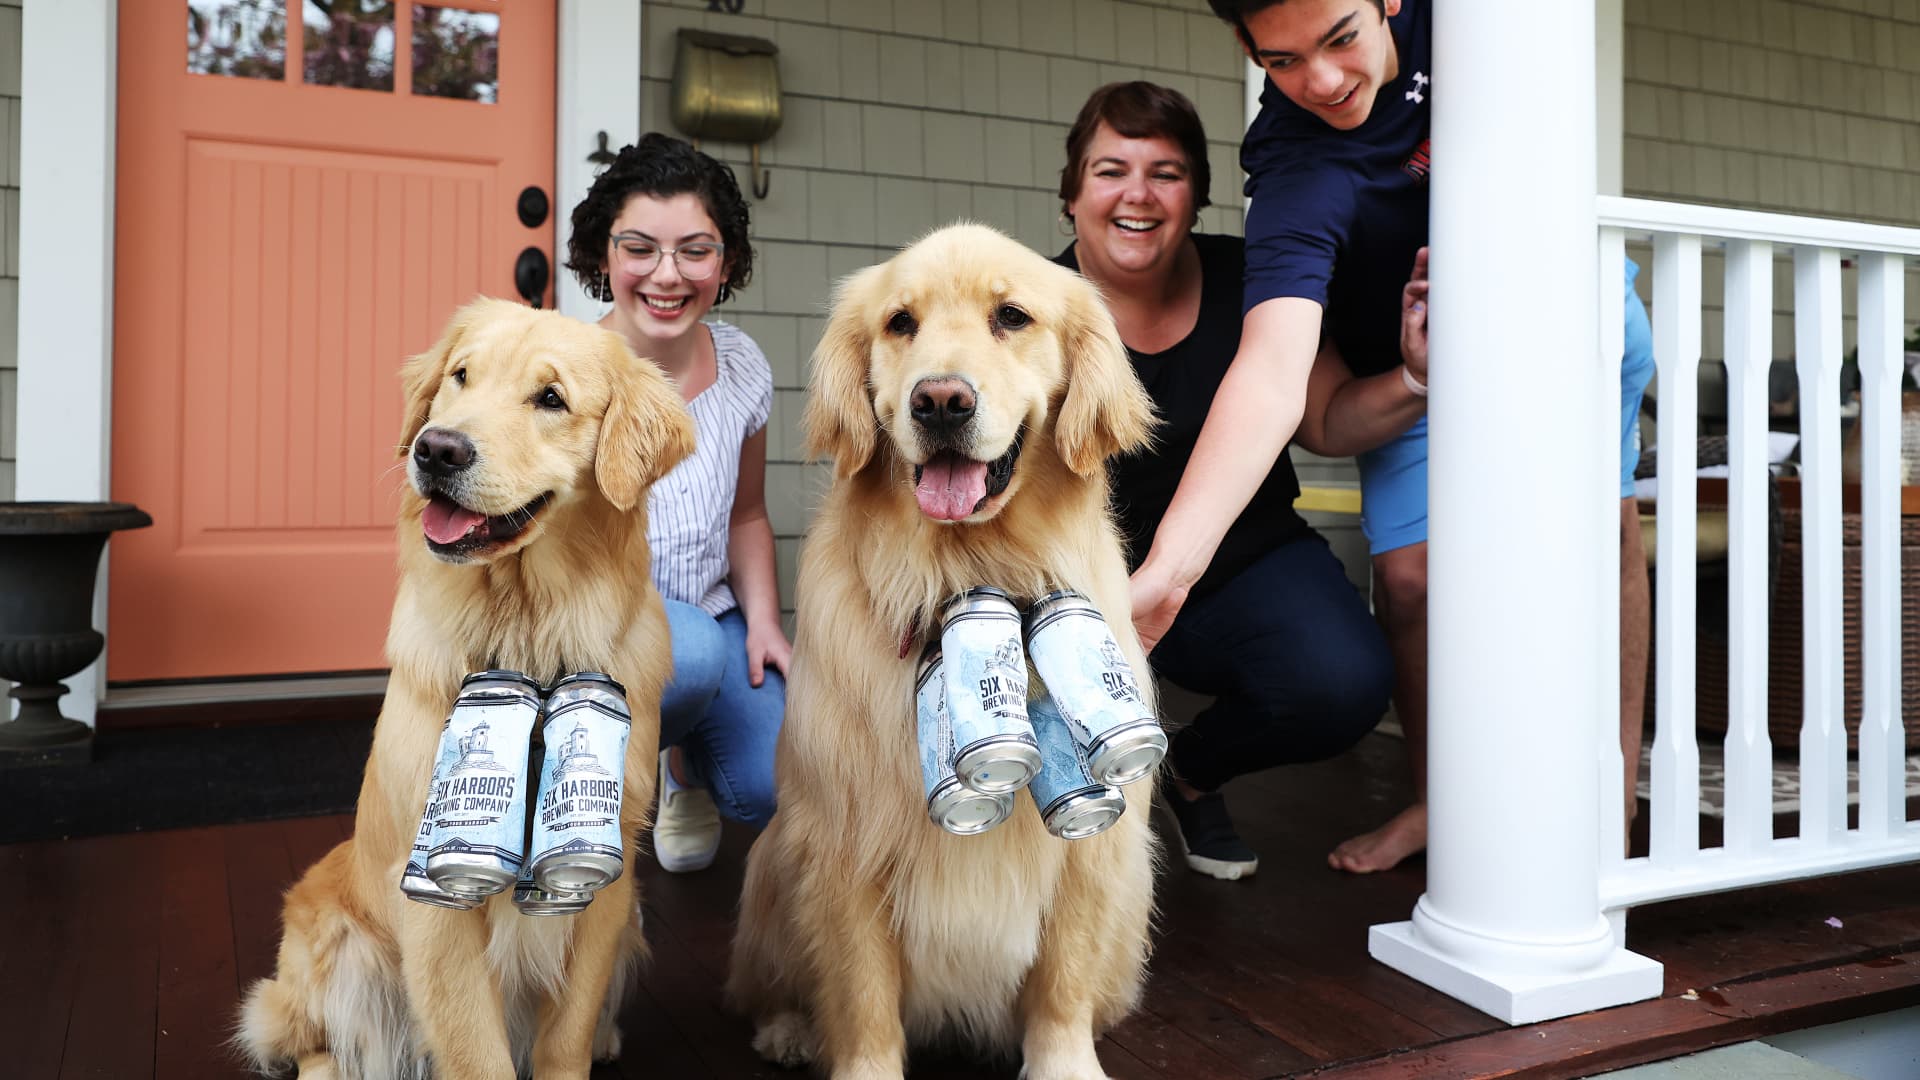 Lisa Fascilla, with children Nina and Alex receive a beer delivery. (Photo by Al Bello/Getty Images)